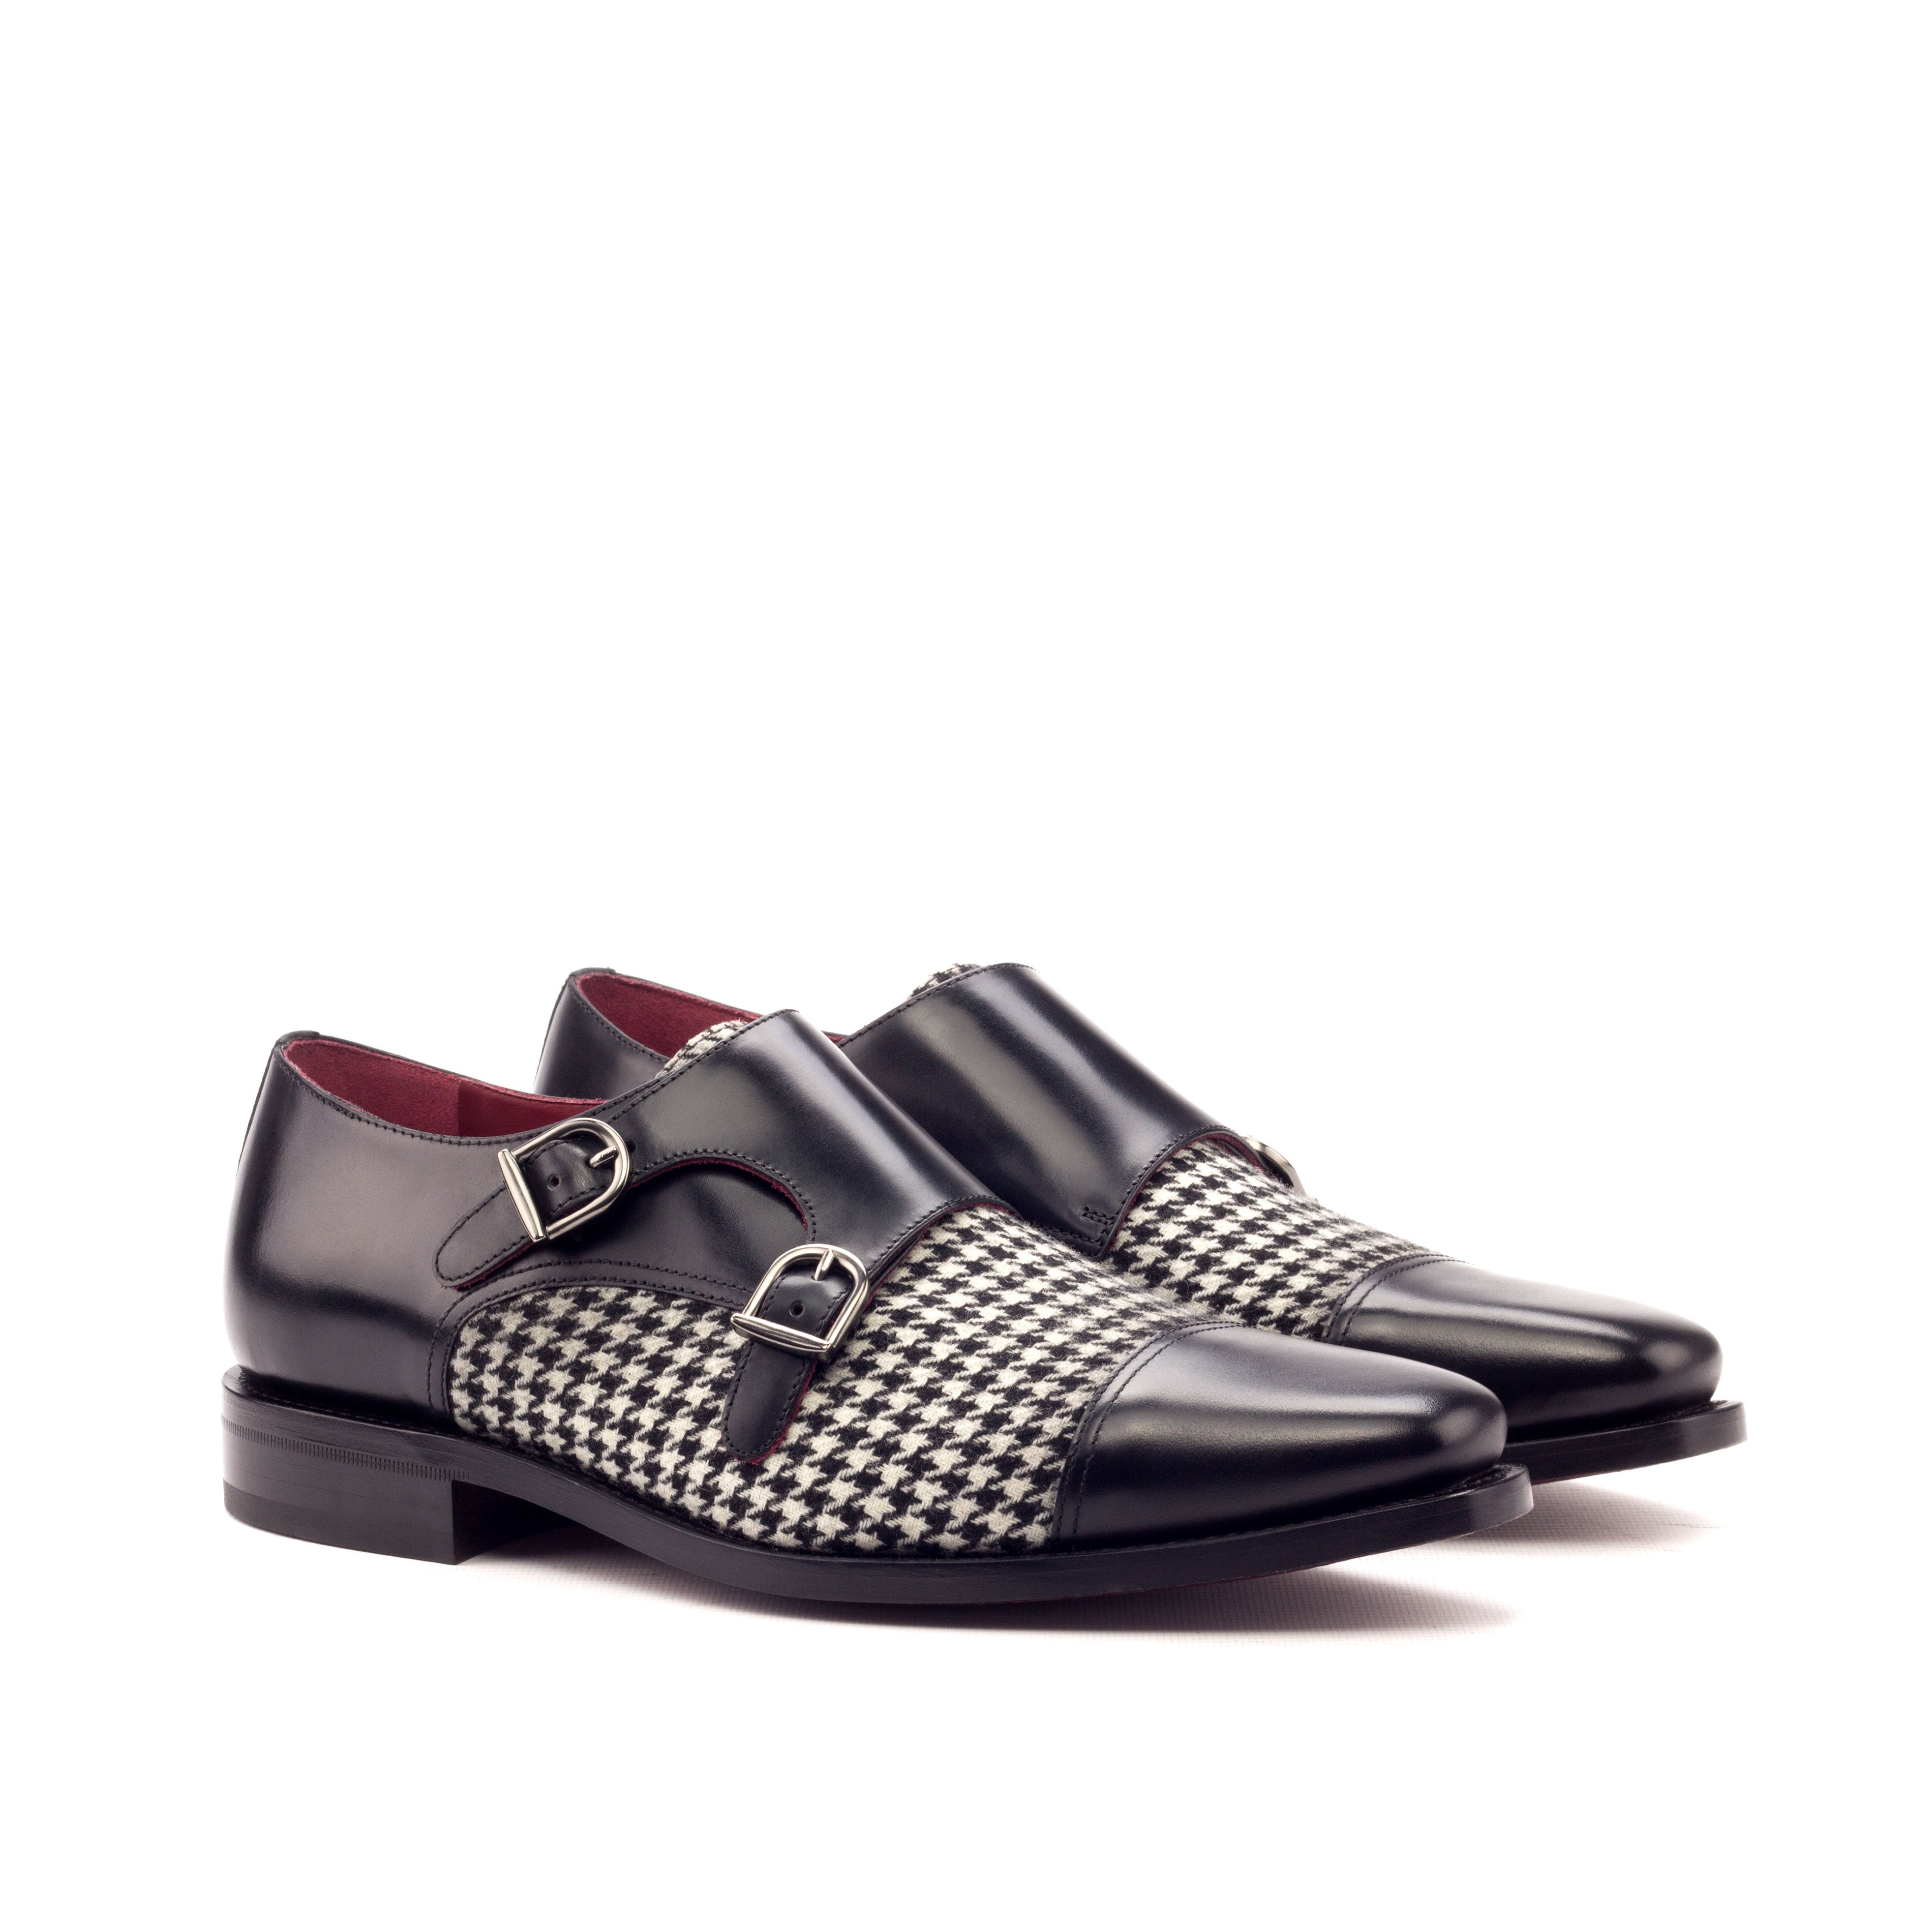 Black & Houndstooth Double Monk